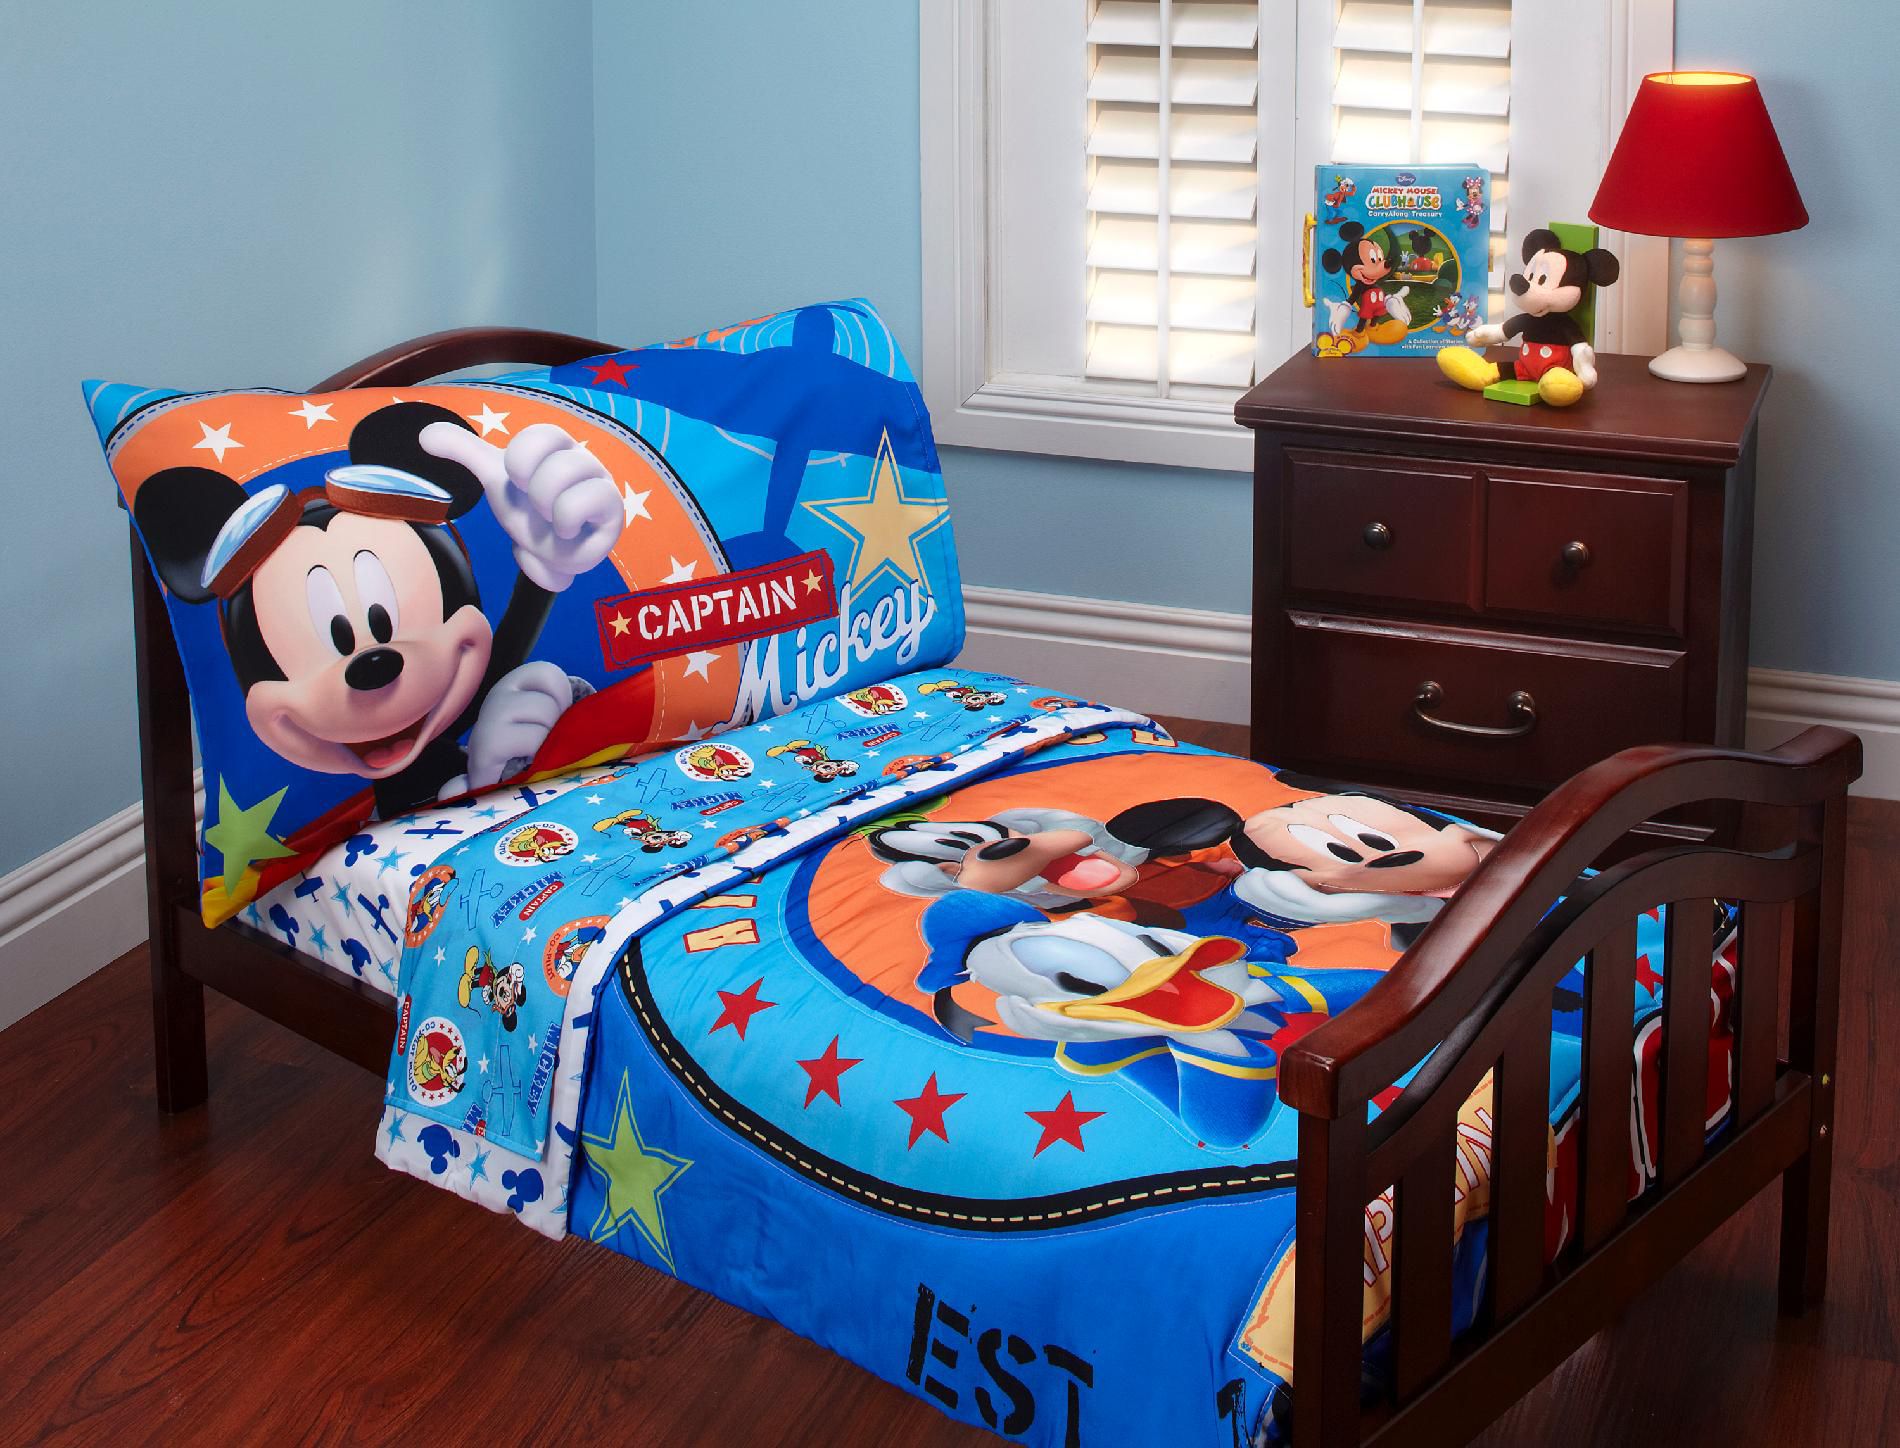 Disney Baby Mickey Mouse Toddler Bed Set Baby Baby Bedding Bedding Sets & Collections